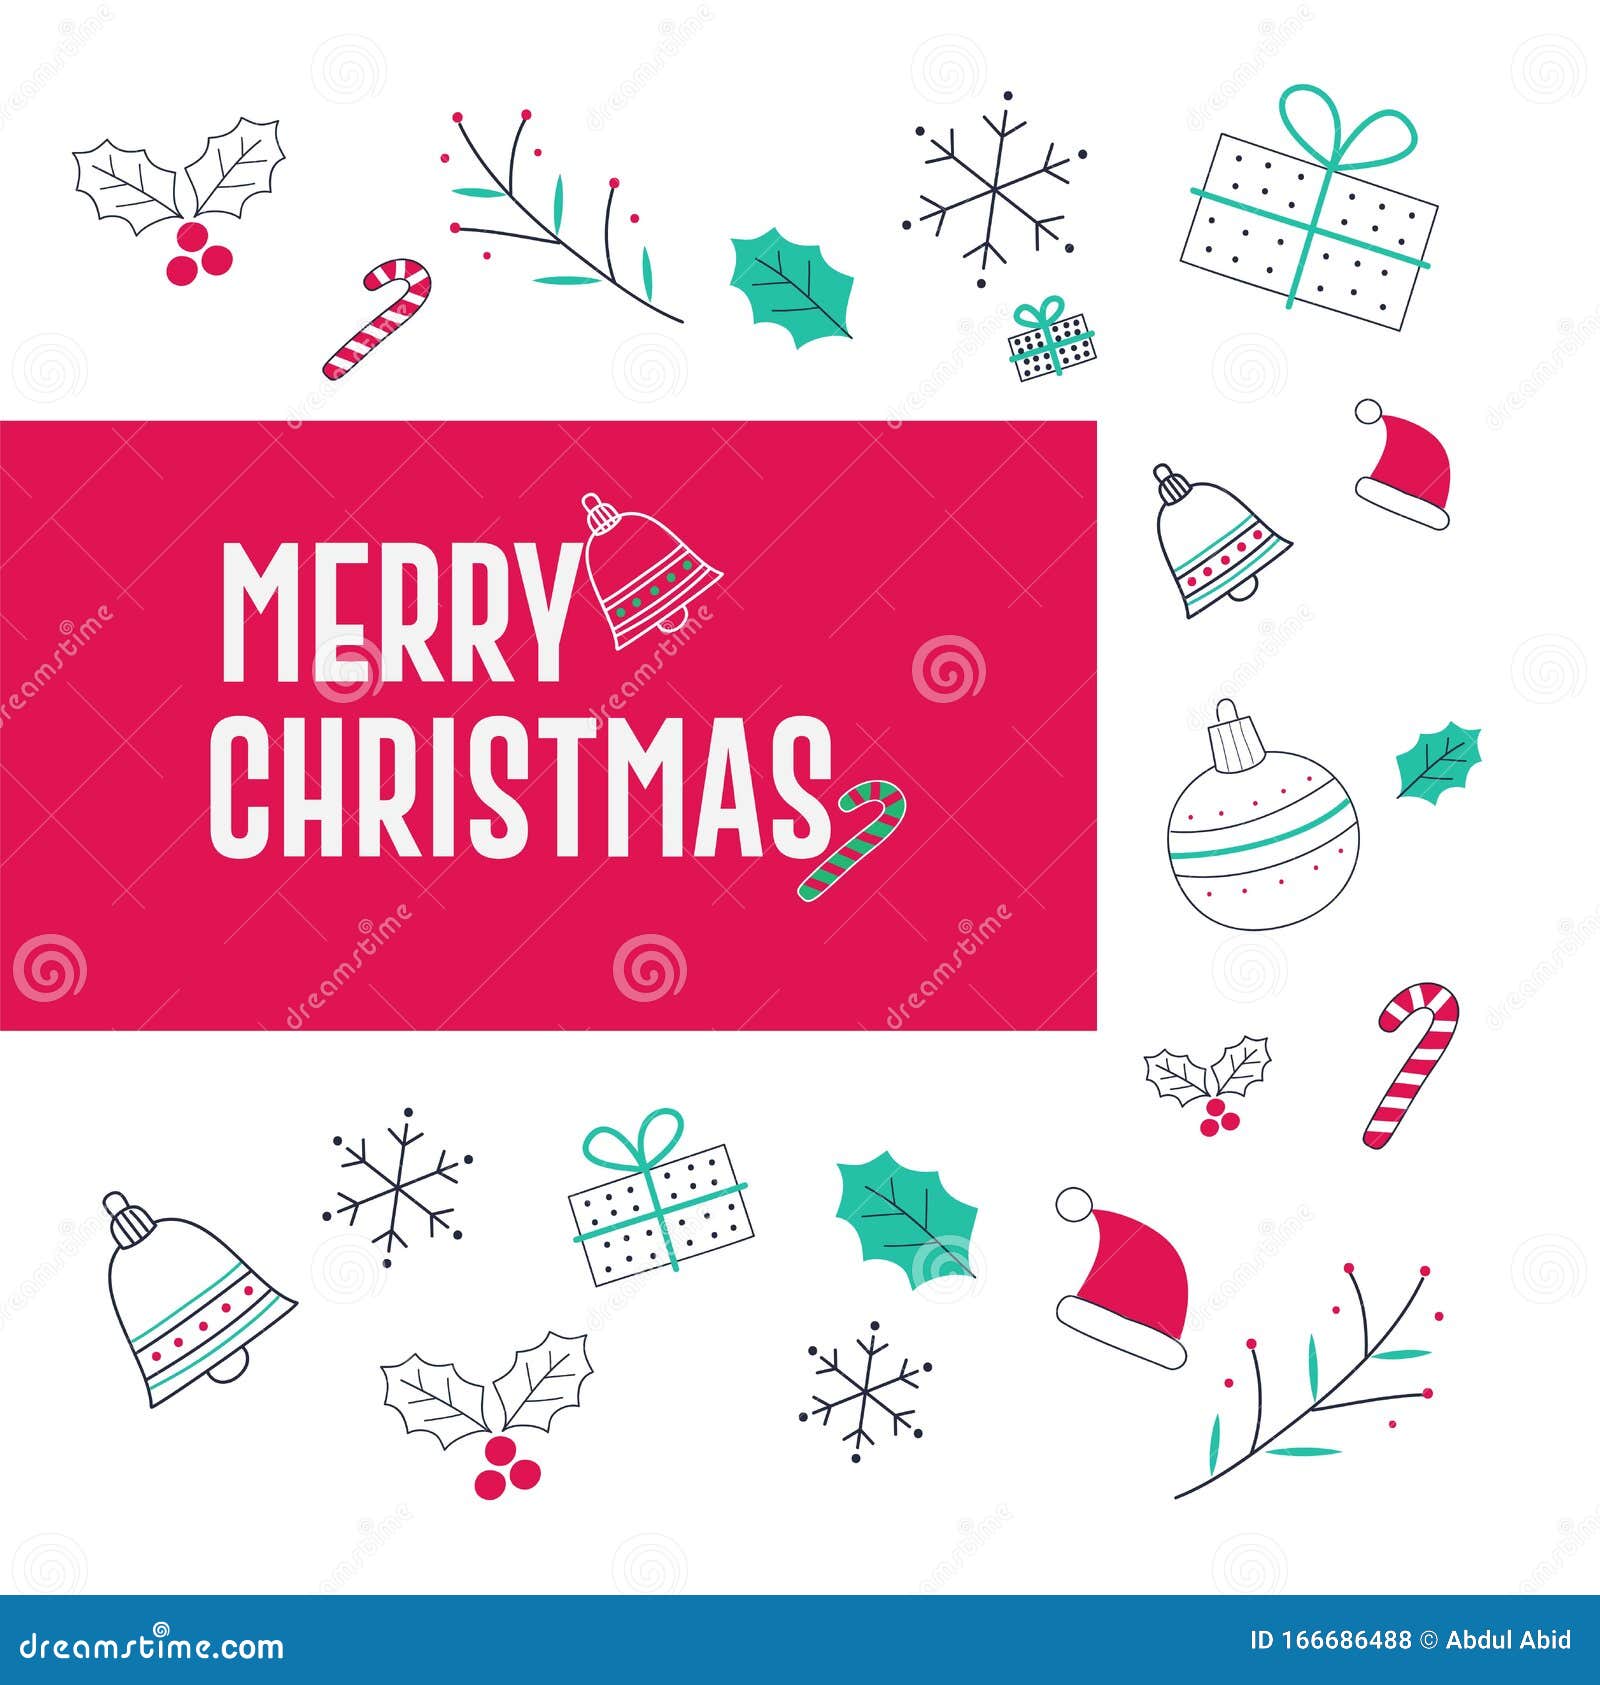 merry christmas : greeting card with gift box or santa cap, s